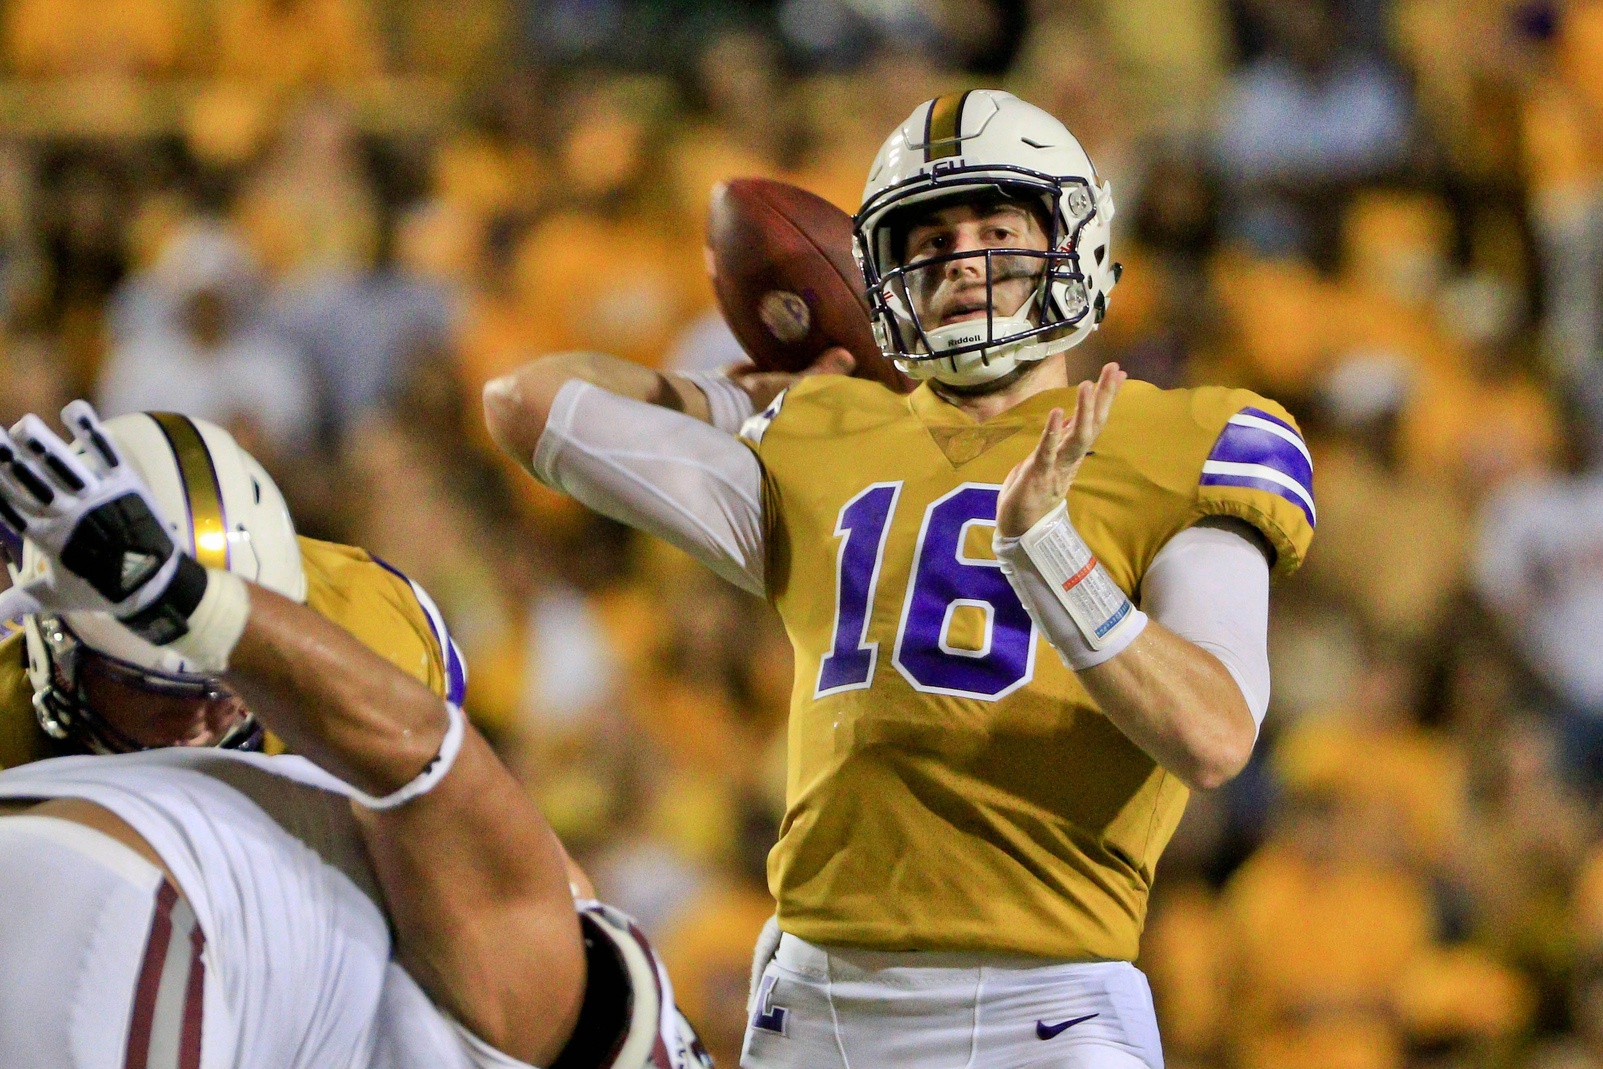 Sep 17, 2016; Baton Rouge, LA, USA; LSU Tigers quarterback Danny Etling (16) throws a pass against the Mississippi State Bulldogs during the second quarter of a game at Tiger Stadium. Mandatory Credit: Derick E. Hingle-USA TODAY Sports